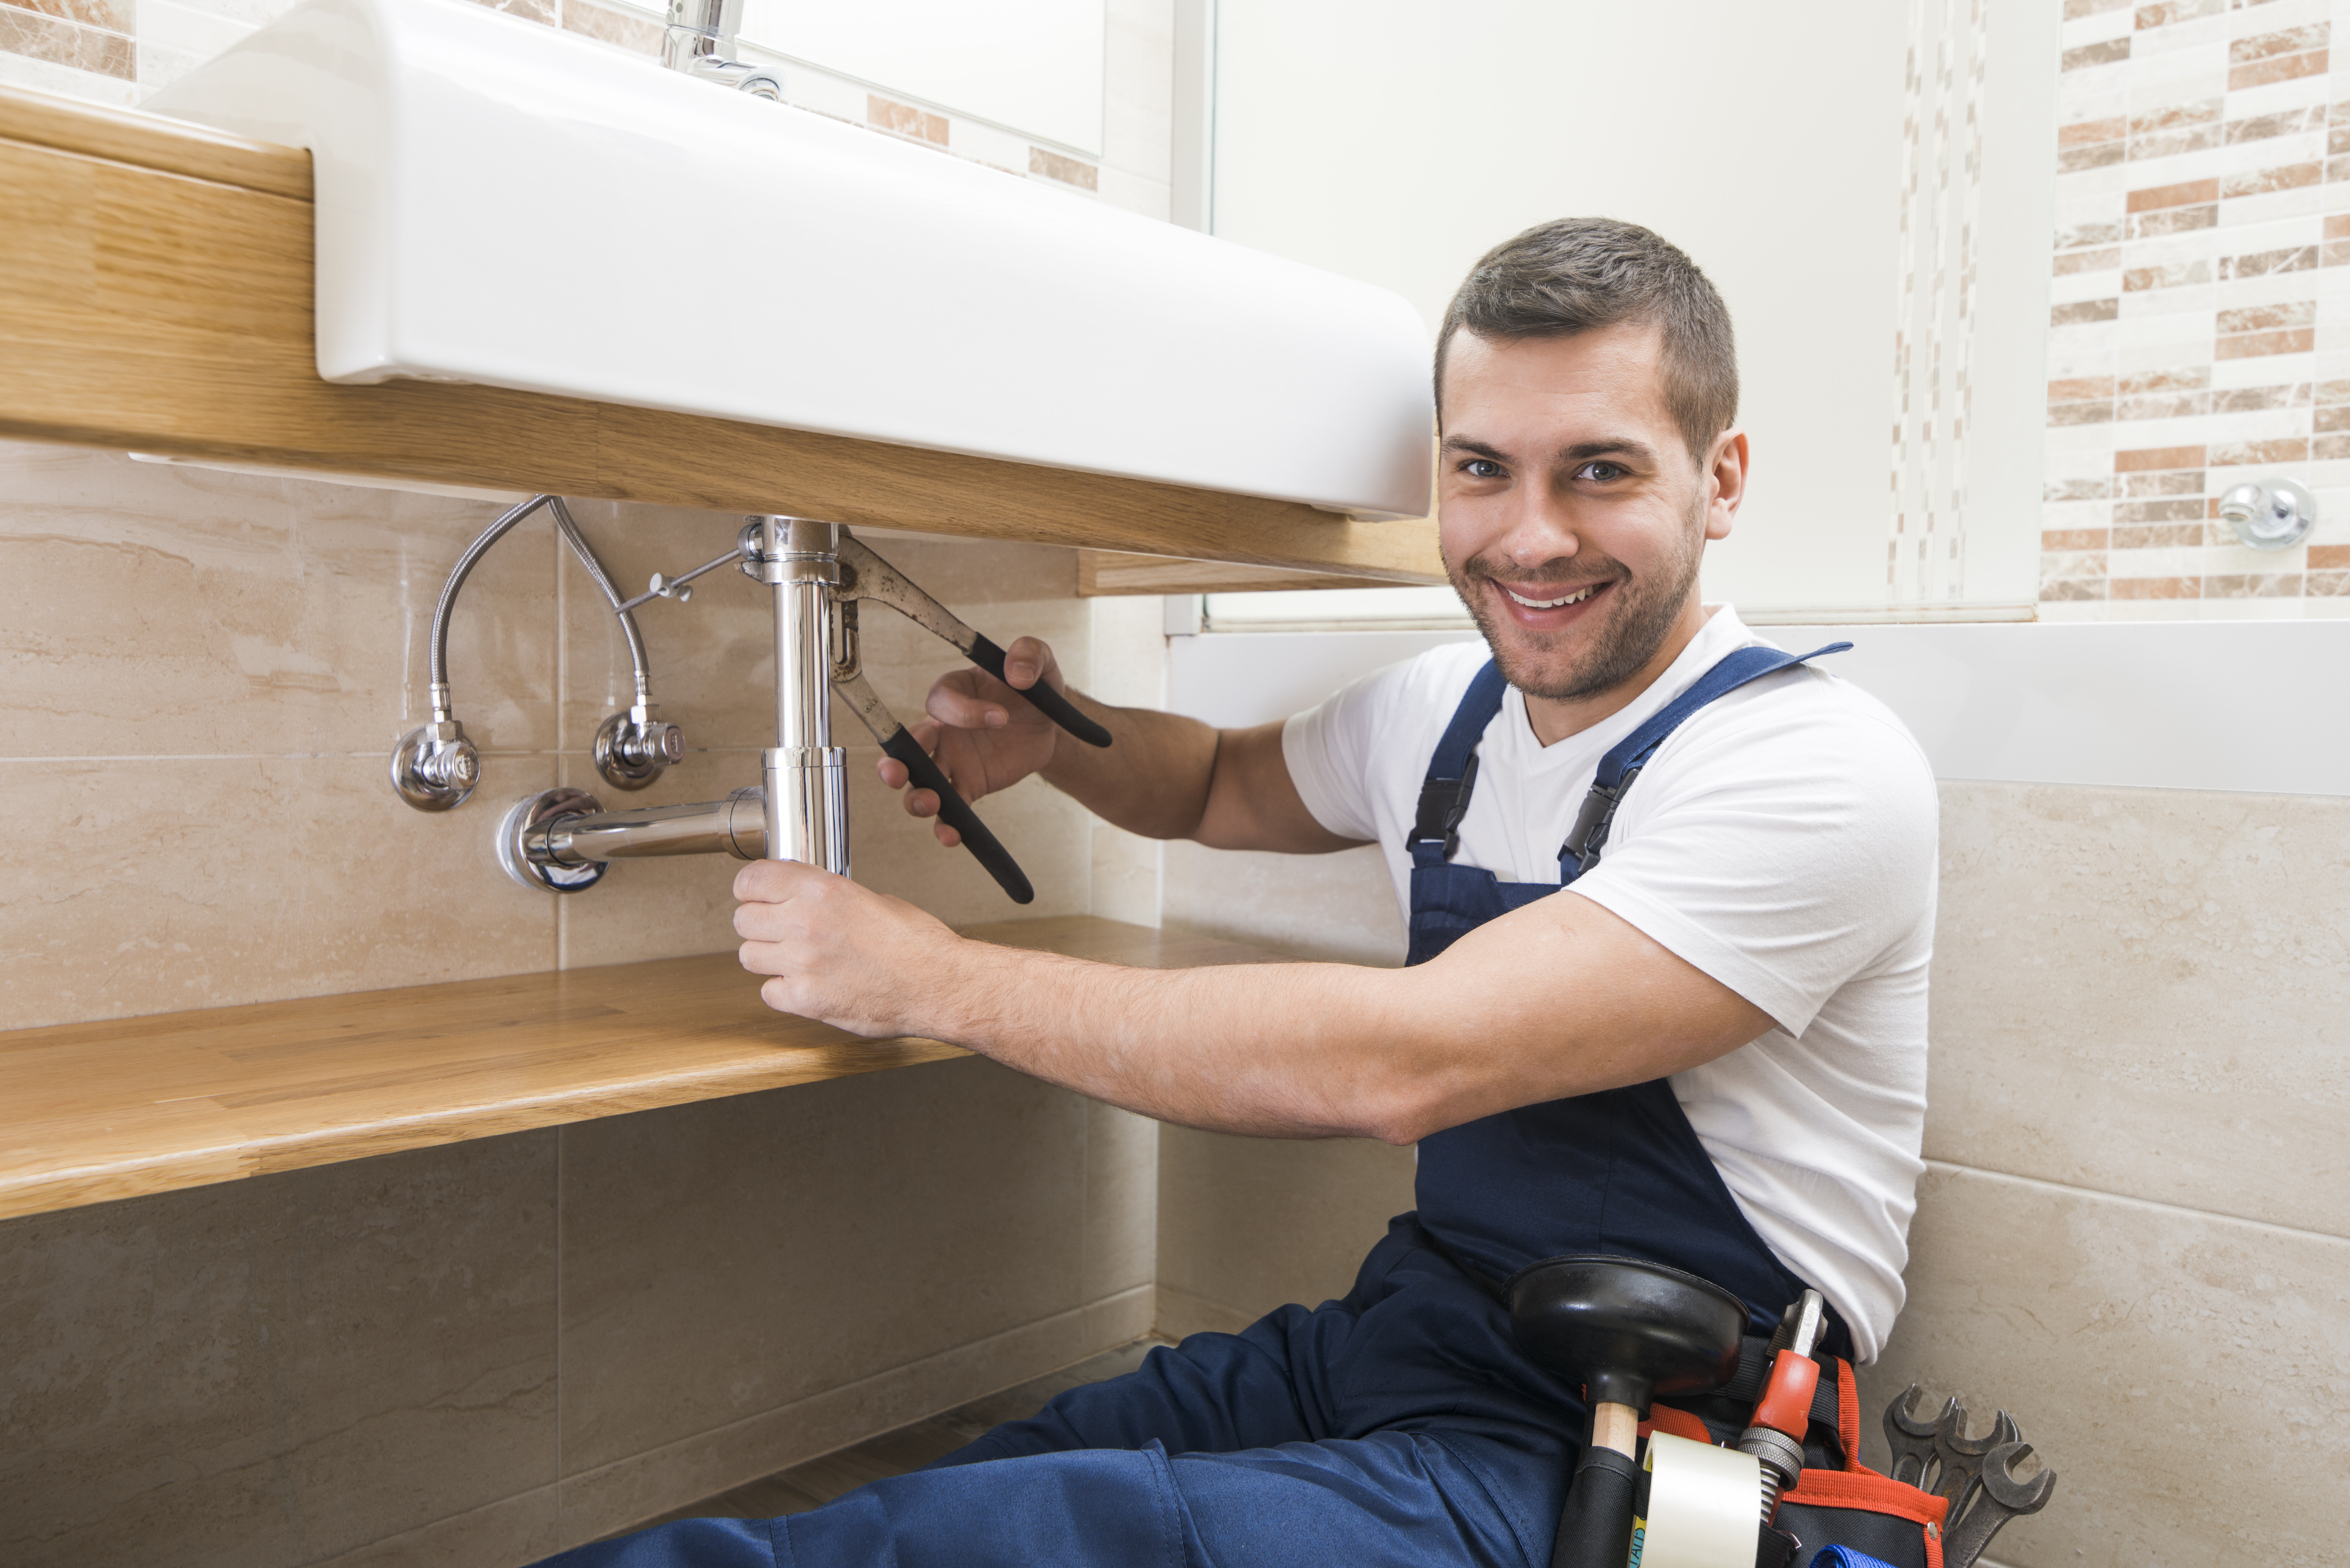 A Top Rated Plumbing Contractor in Ottawa, wearing a white shirt and blue coveralls is shown sitting parallel to a sink drain.  He is holding a valve stem in one hand and a set of pliers in the other while working on hooking up the drain.